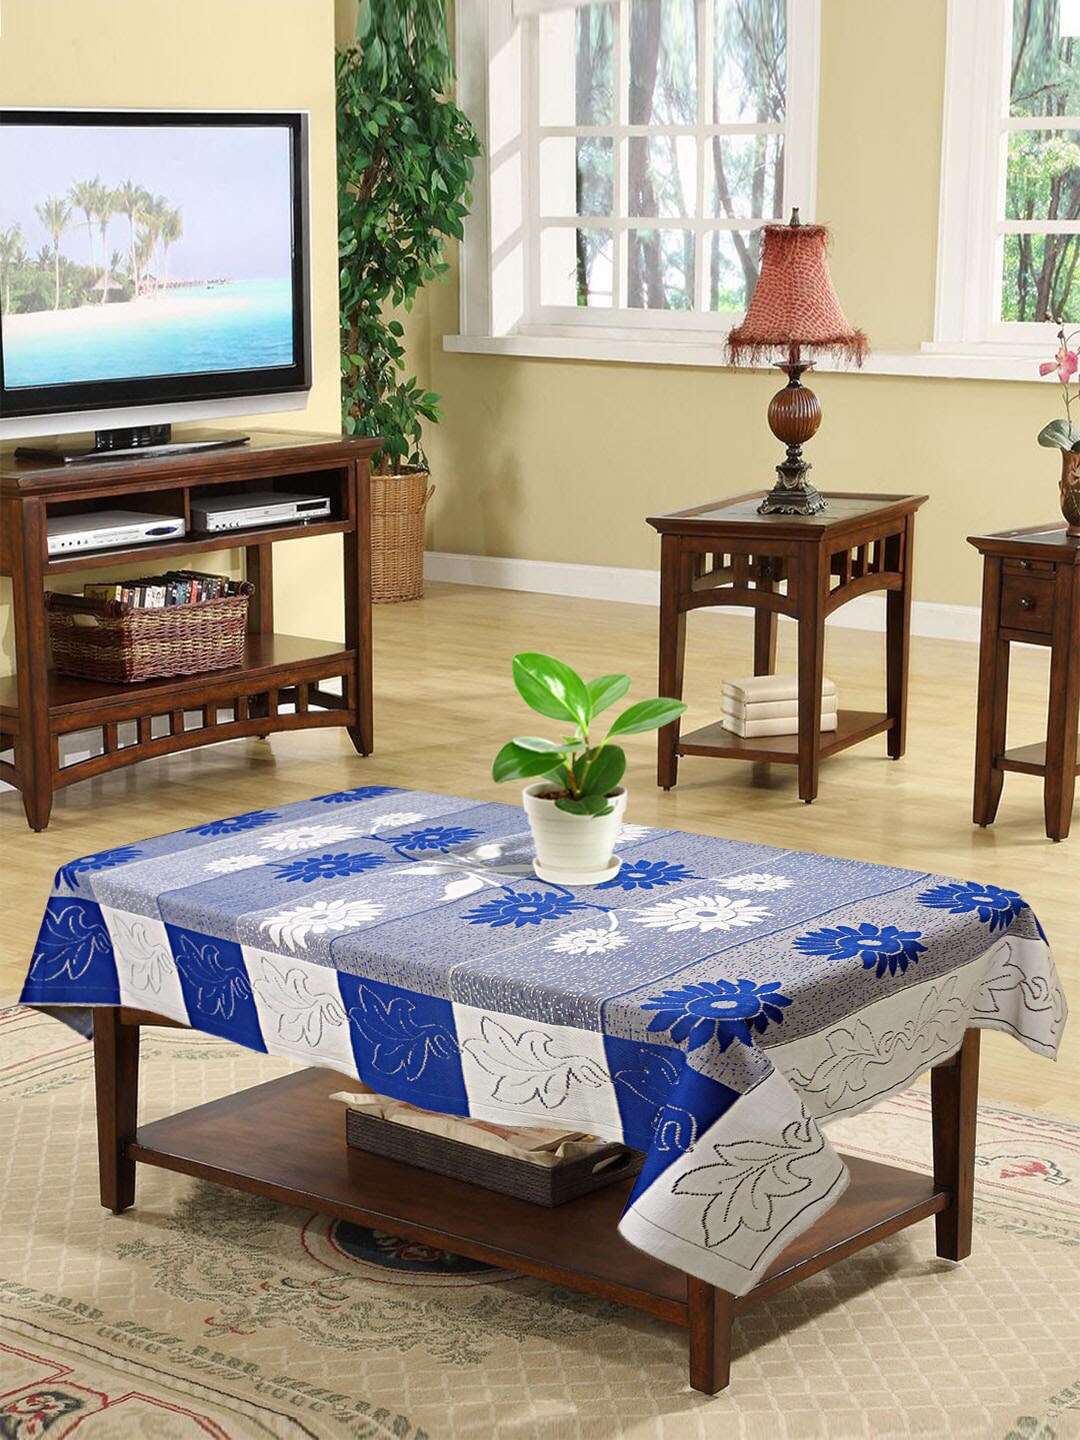 Kuber Industries Blue & White Floral Printed 4-Seater Cotton Table Cover Price in India